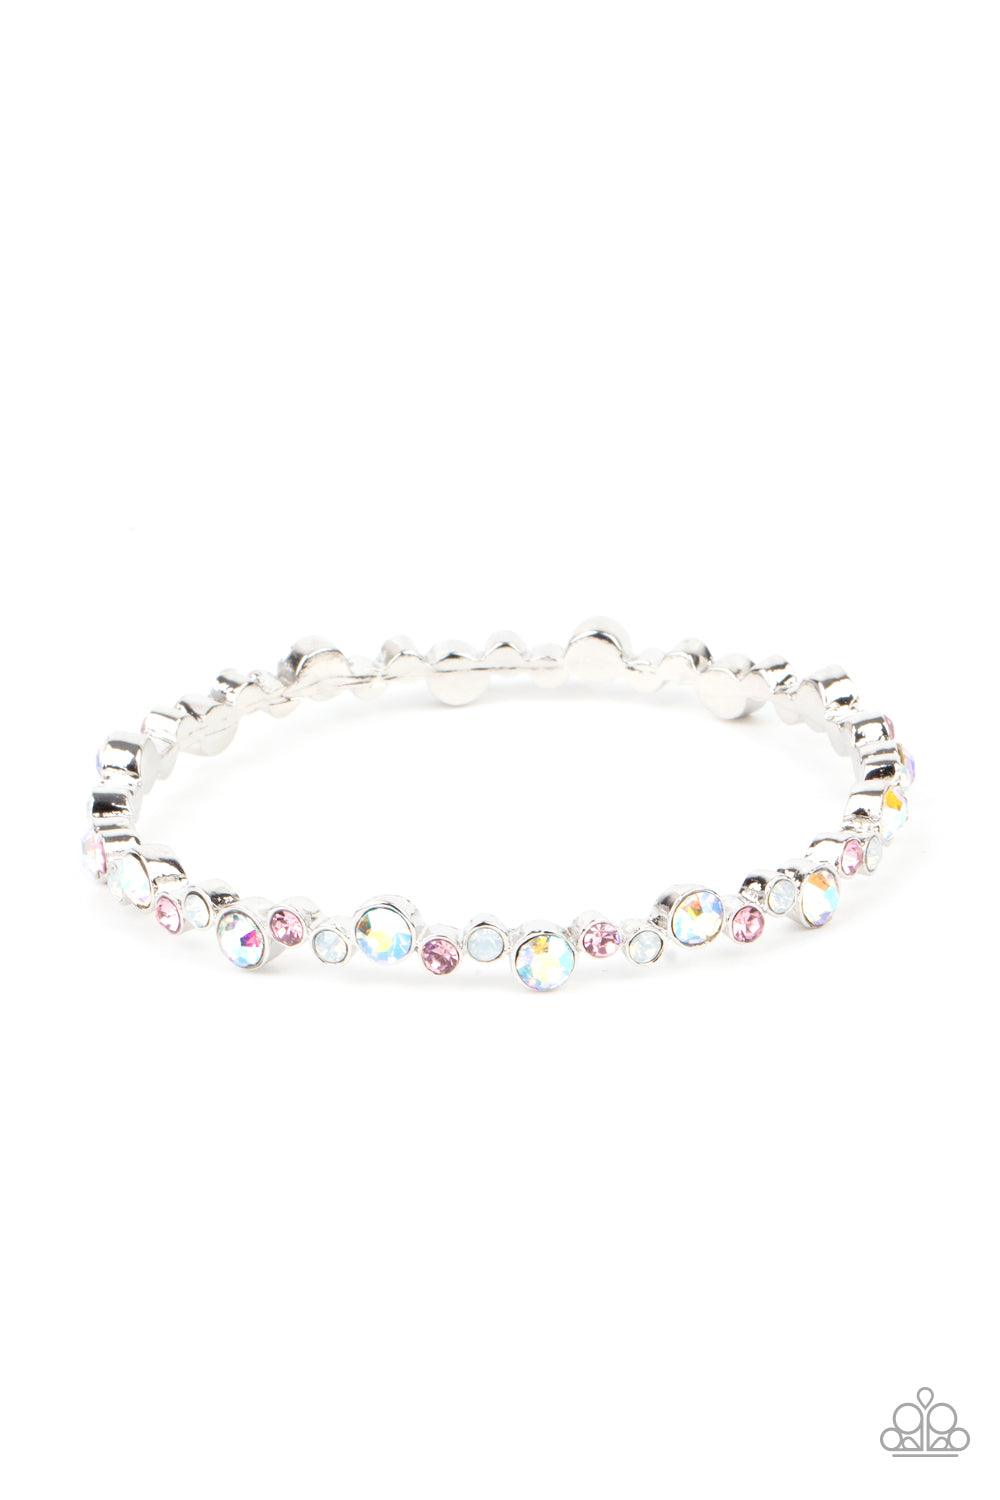 Paparazzi Accessories Twinkly Trendsetter - Multi Encased in sleek silver fittings, a twinkly collection of dark pink, iridescent, and white rhinestones coalesce into a glittery bangle around the wrist. Sold as one individual bracelet. Jewelry